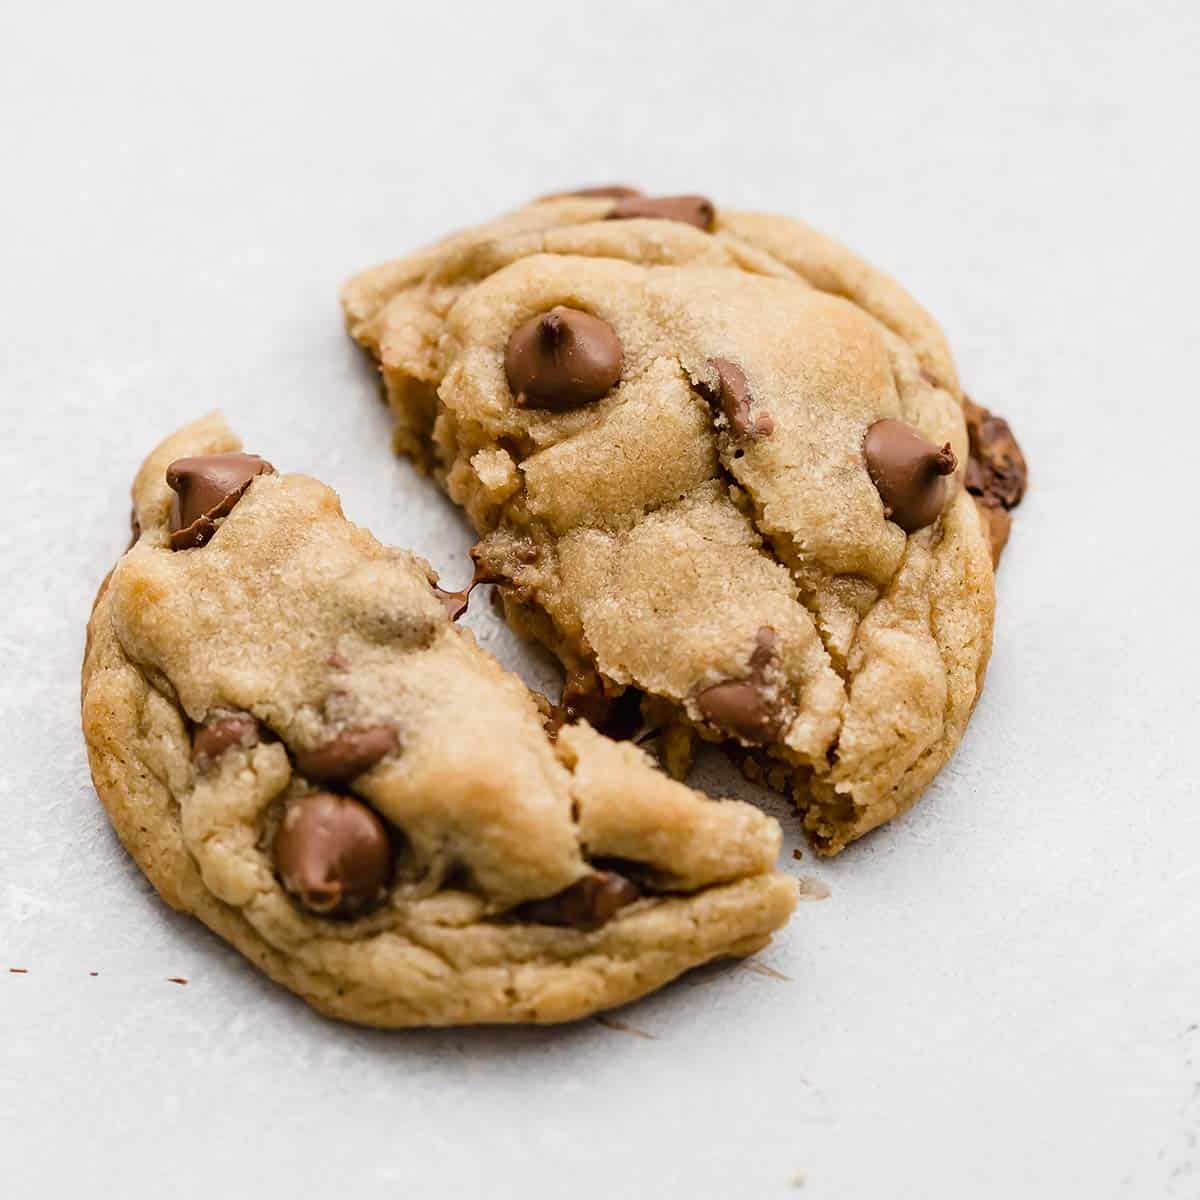 A copycat Crumbl Chocolate Chip Cookie on a white background.